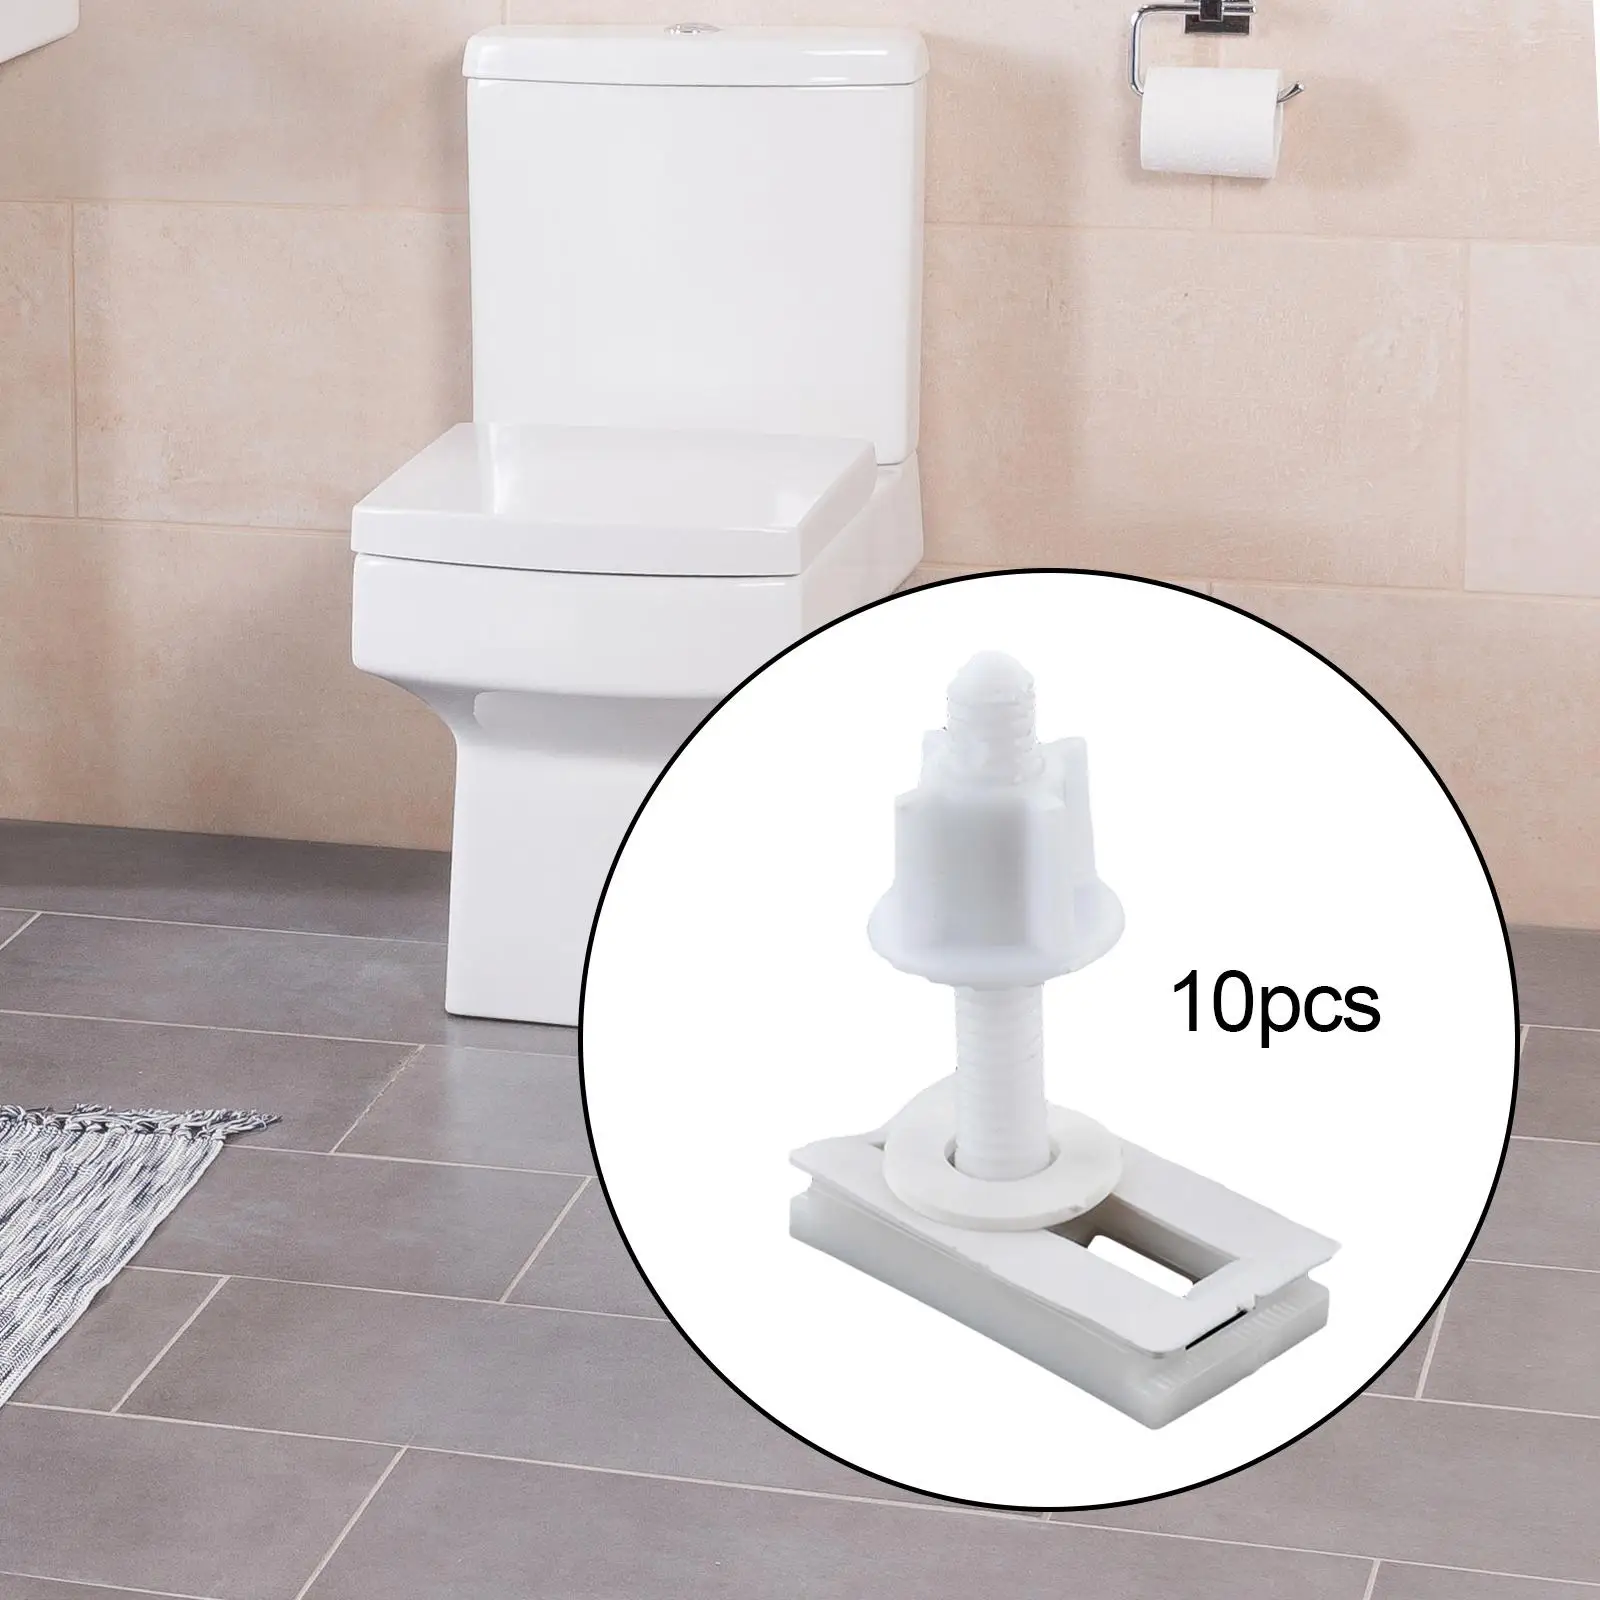 Toilet Seat Hinge Bolt Lightweight Durable Toilet Seat Repair Tool 10 Pieces for Household Hotels Public Places Office Bathrooms